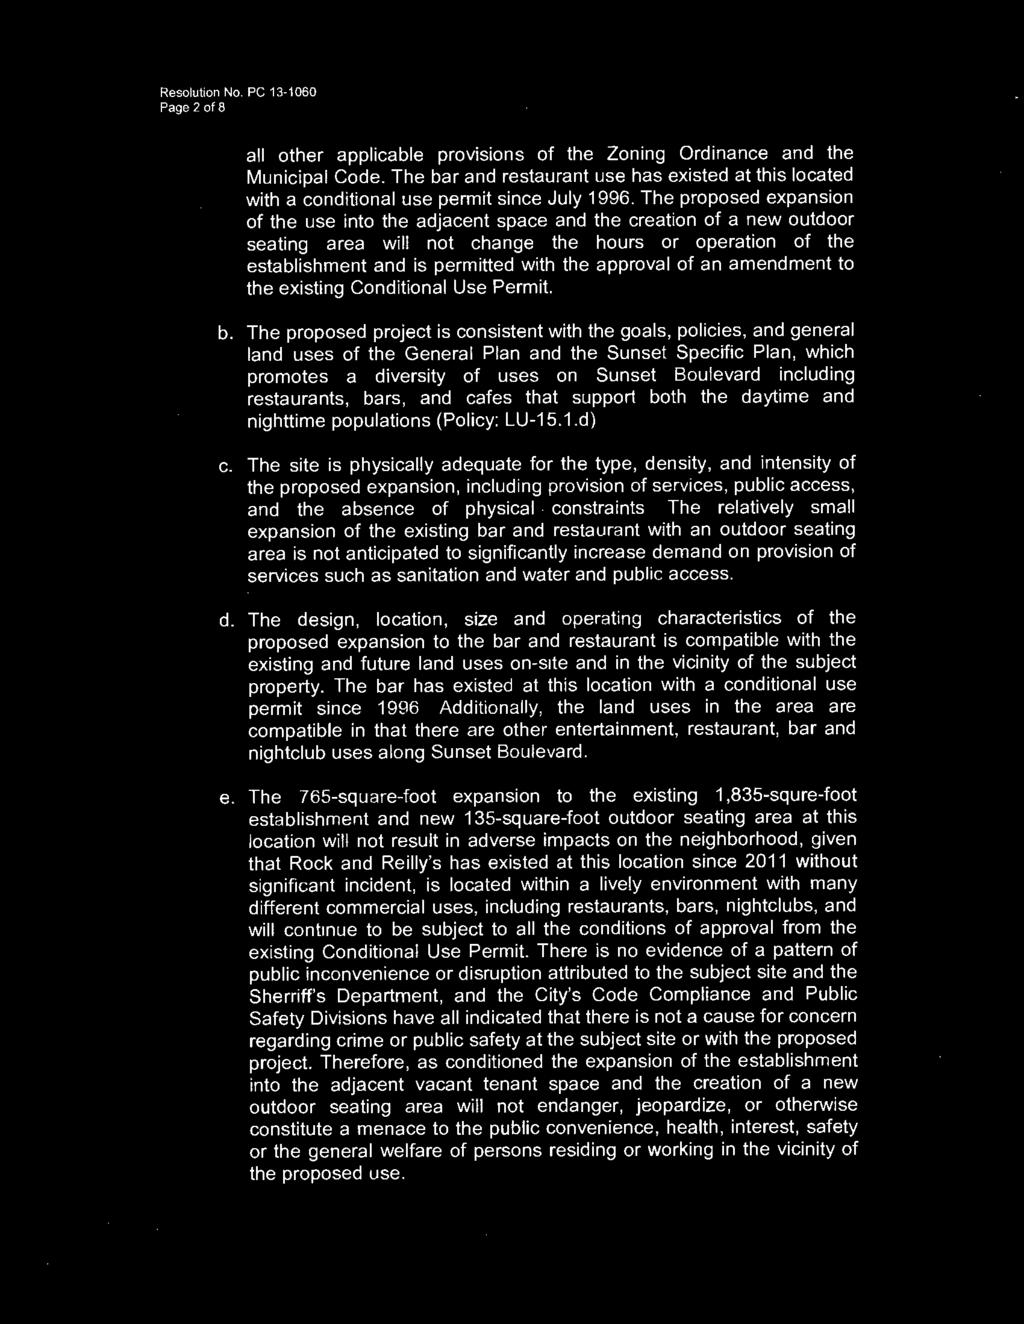 Page 2 of 8 all other applicable prov1s1ons of the Zoning Ordinance and the Municipal Code. The bar and restaurant use has existed at this located with a conditional use permit since July 1996.